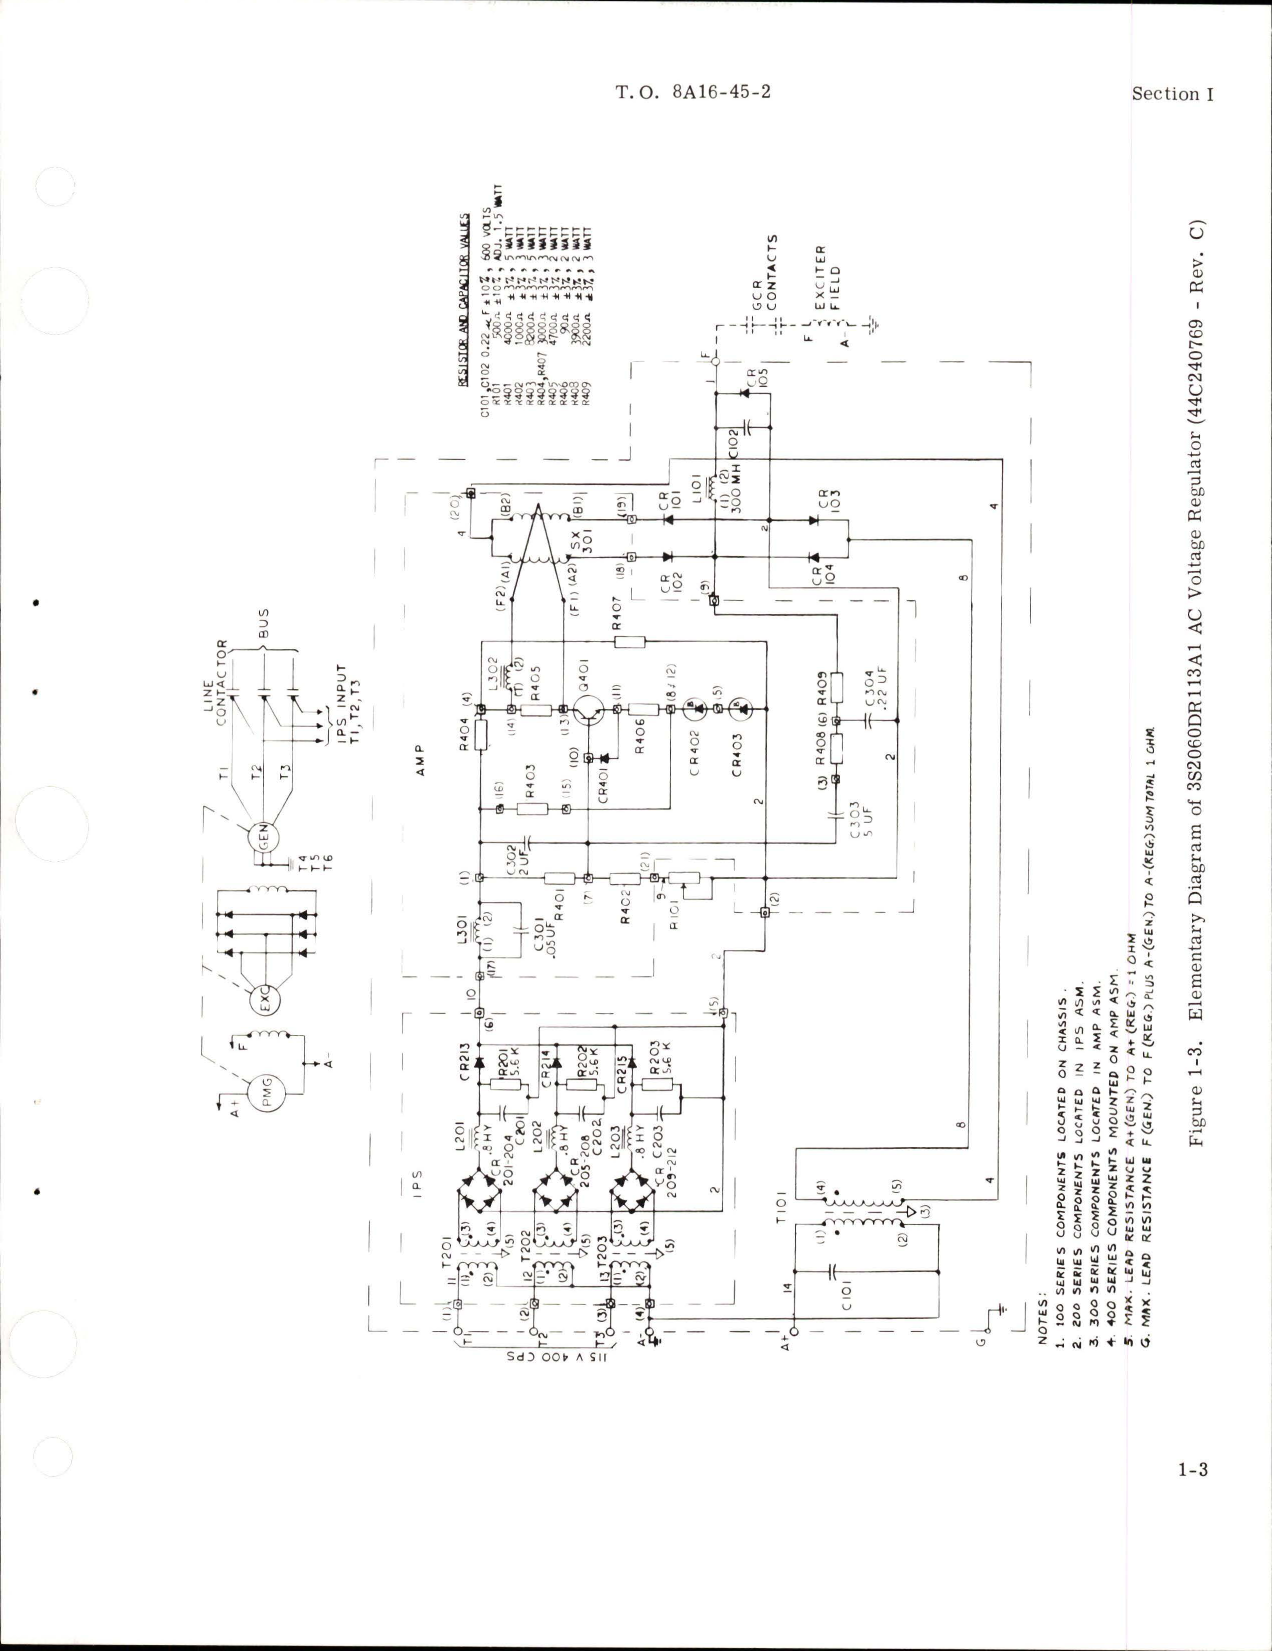 Sample page 7 from AirCorps Library document: Maintenance Instructions for AC Voltage Regulator - Model 3S2060DR113A1